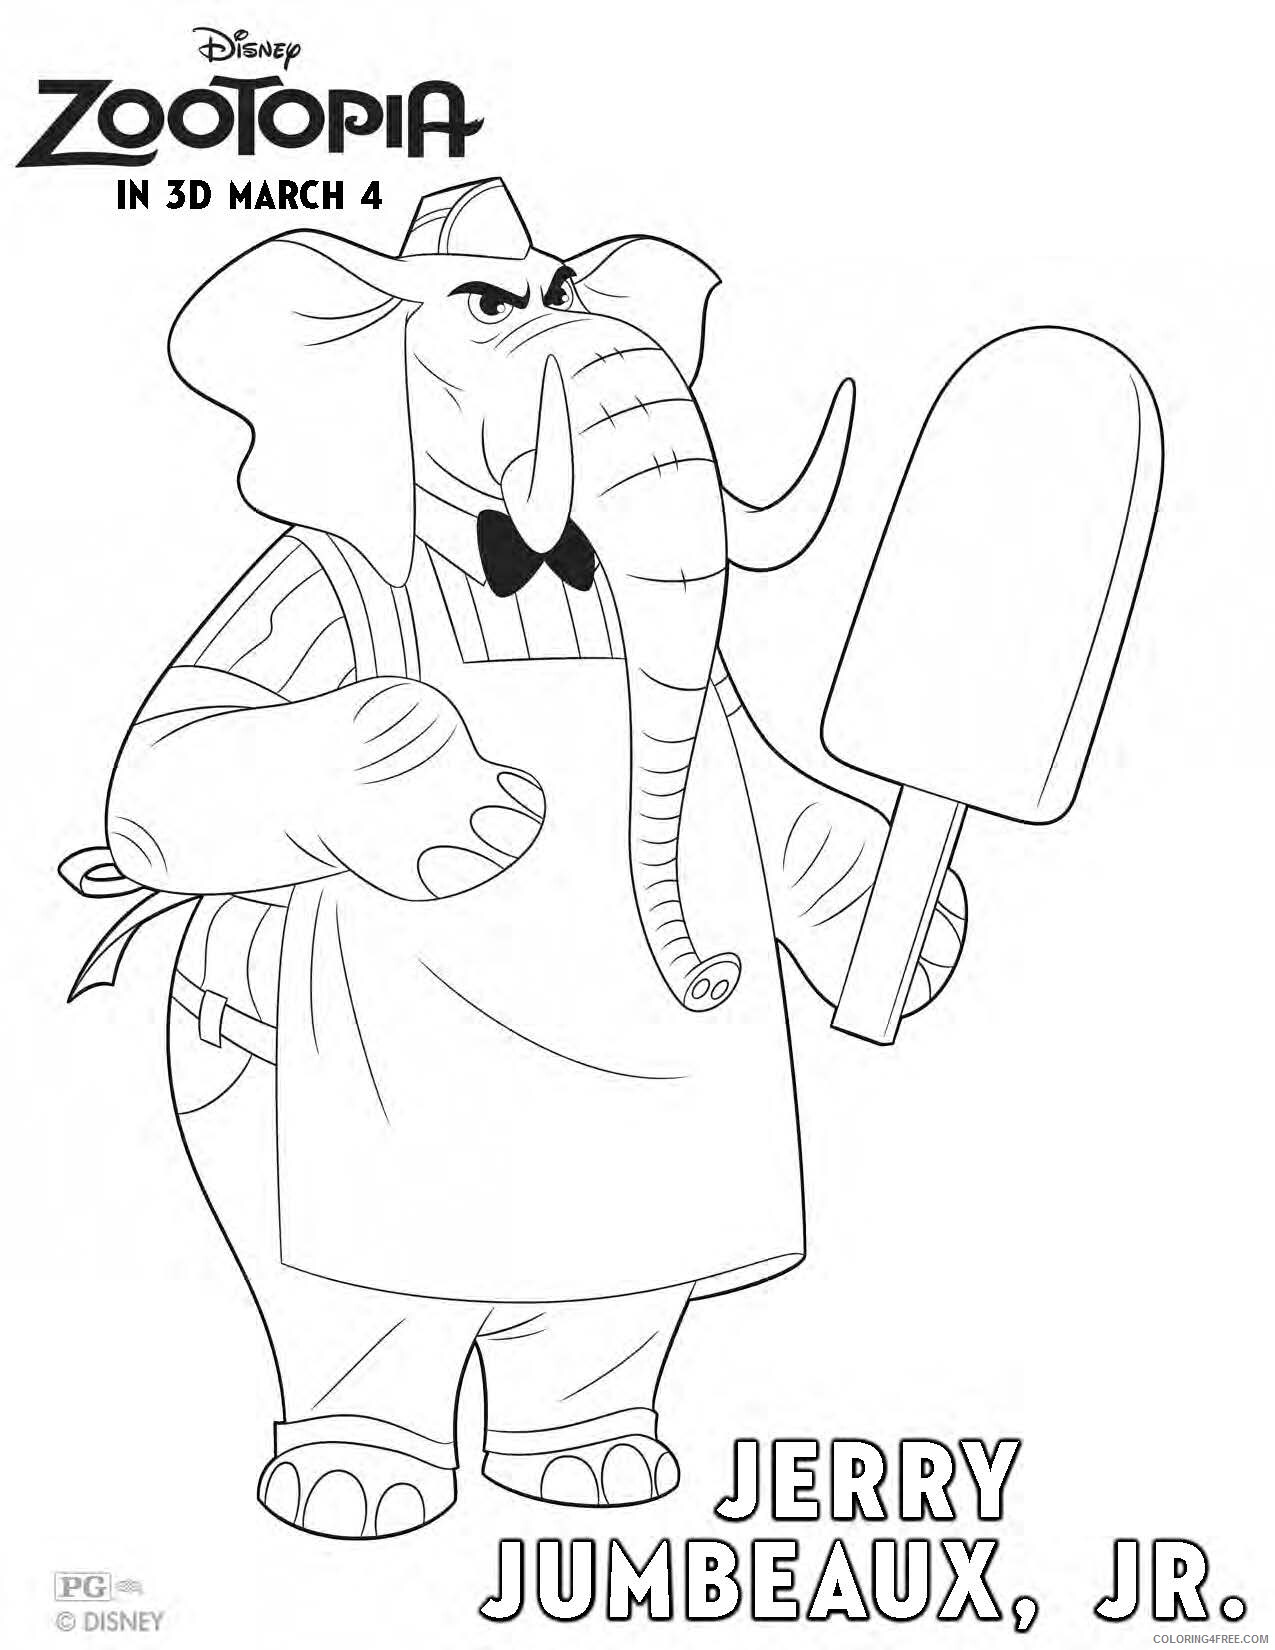 Zootopia Coloring Pages TV Film Zootopia Jerry Jumbeaux Jr Printable 2020 12038 Coloring4free